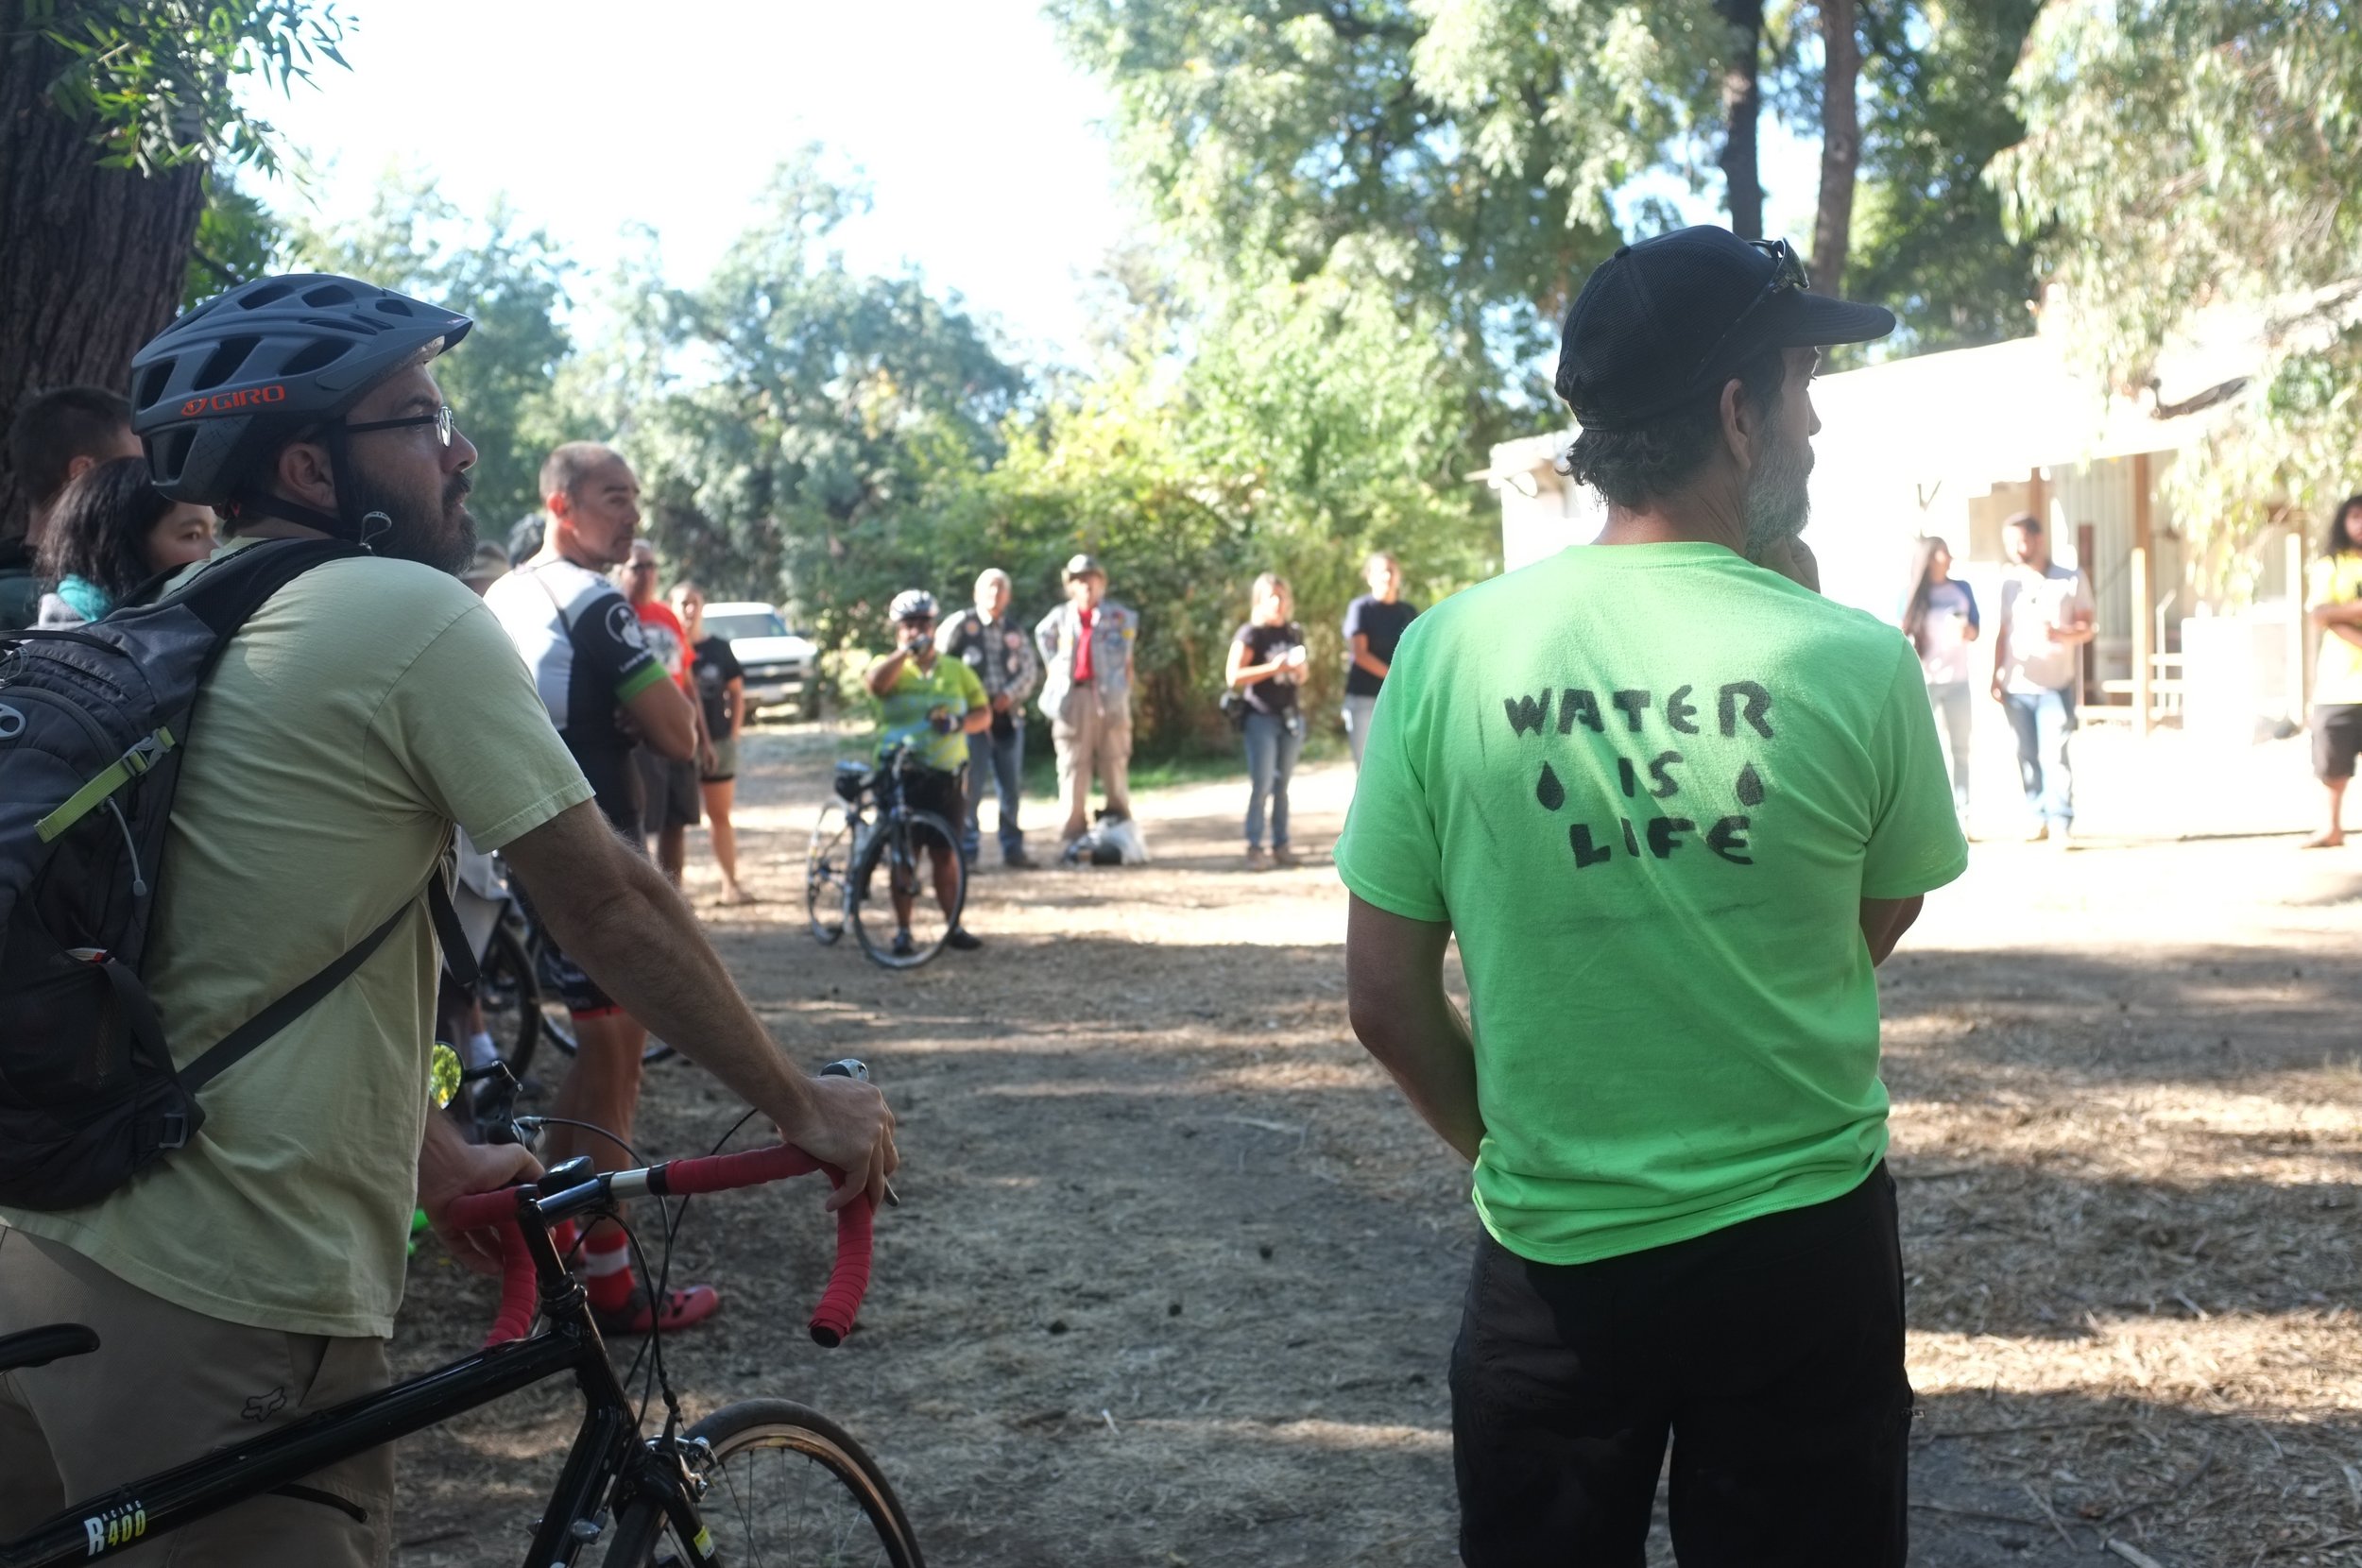  Butte County, CA — Ron Toppi (right) waits for the second day of Run4Salmon biking to begin. The route will take them through the town of Chico and then north along the Sacramento River. September 24, 2018. Judy Silber/The Spiritual Edge  